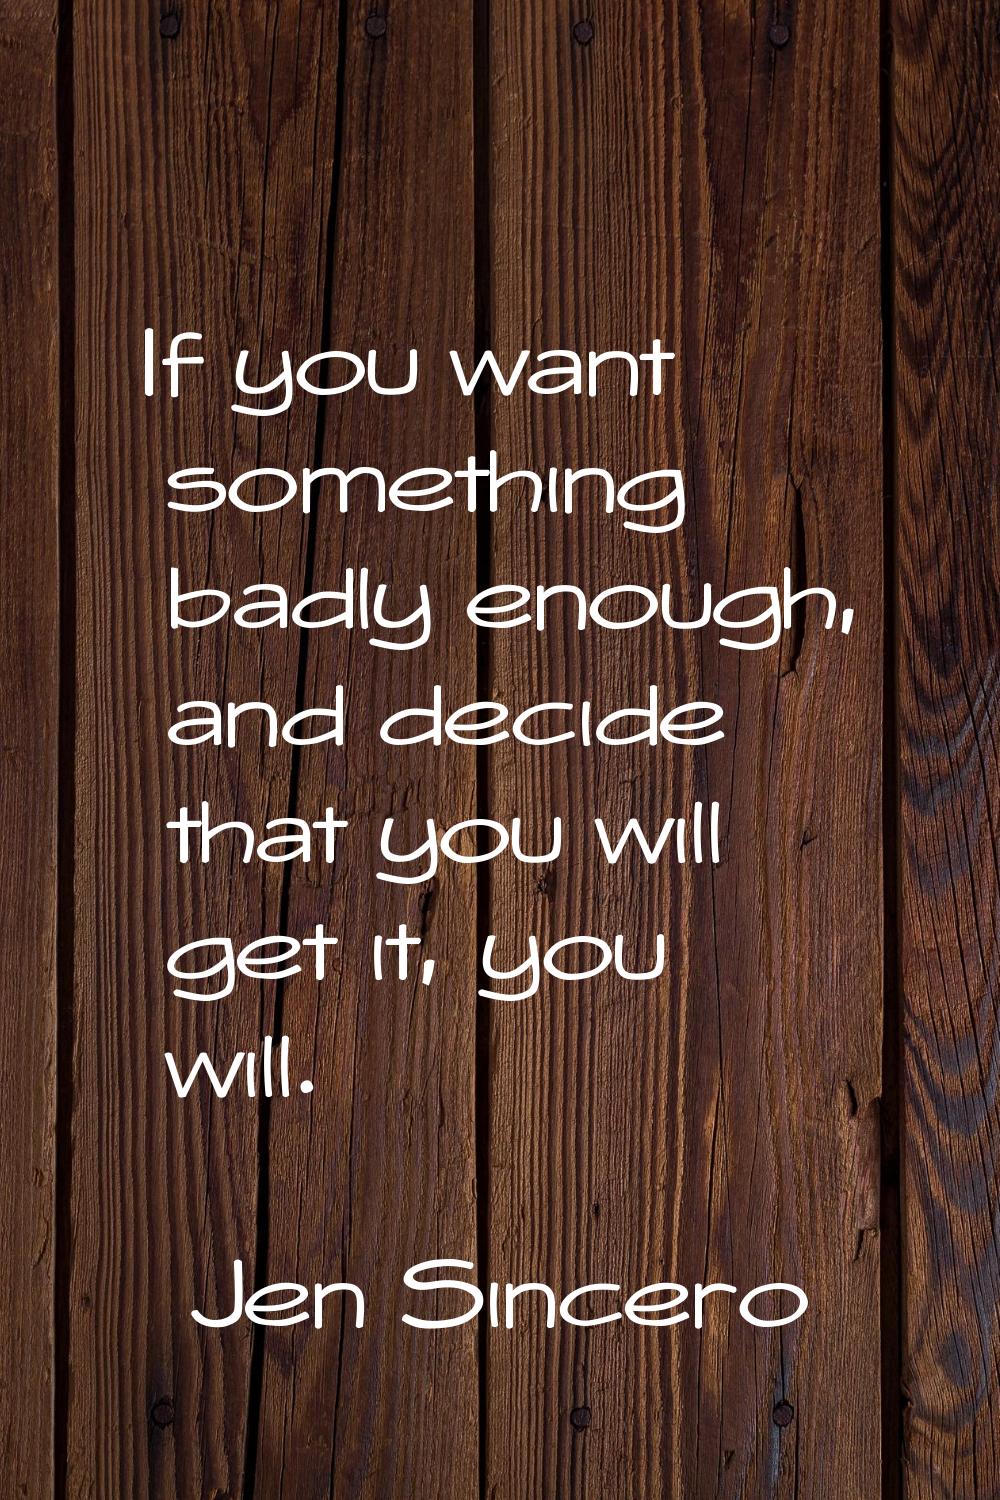 If you want something badly enough, and decide that you will get it, you will.